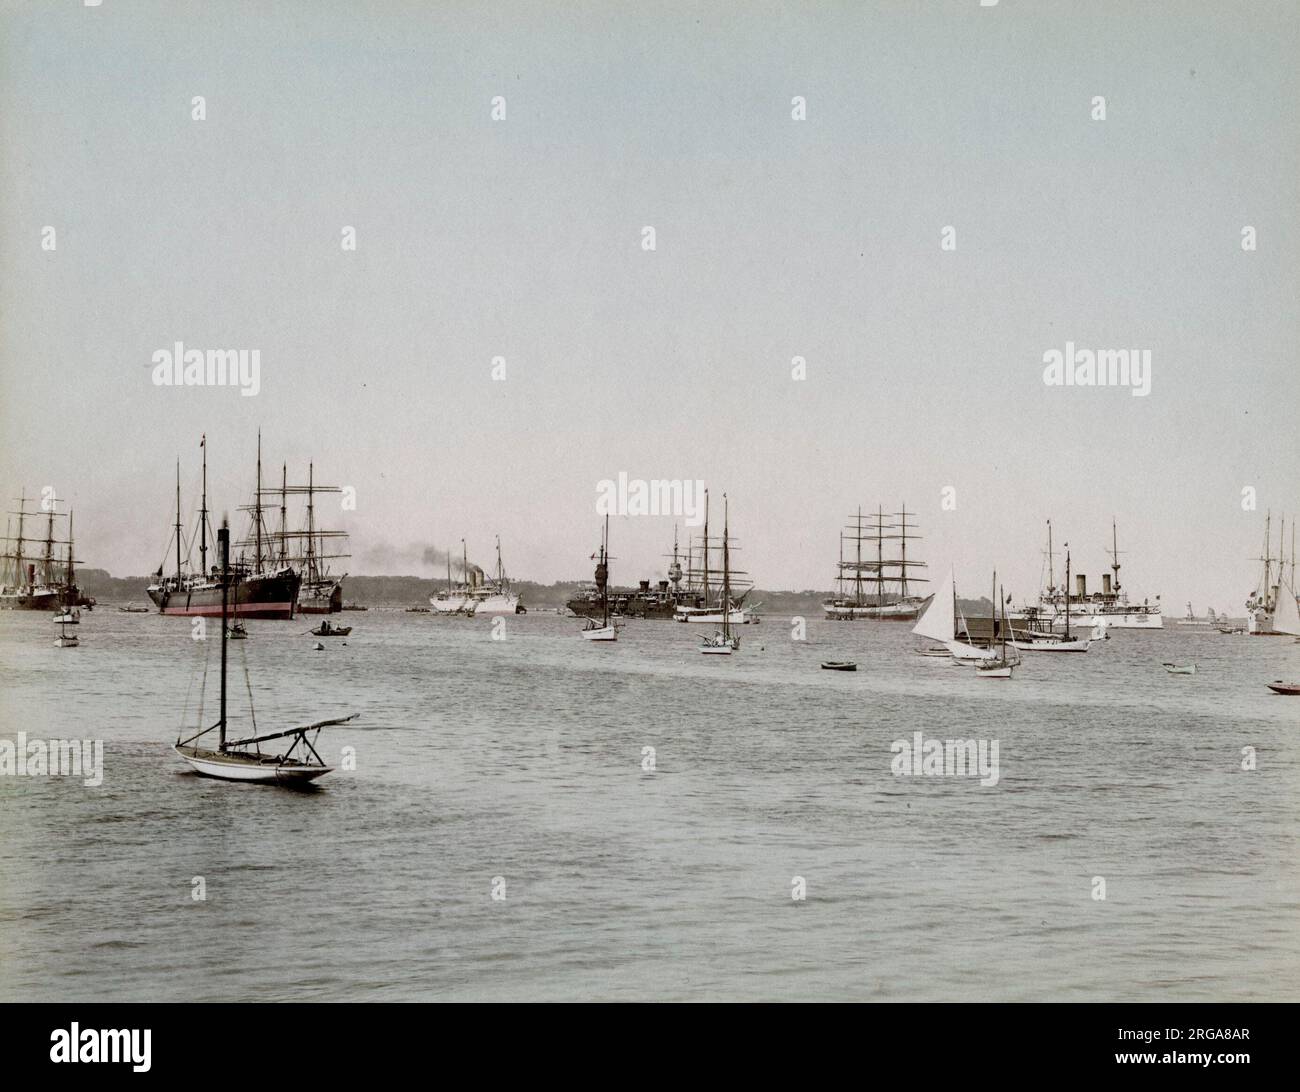 Steam and sailing ships in the harbour, yokohama, Japan. Vintage 19th ...